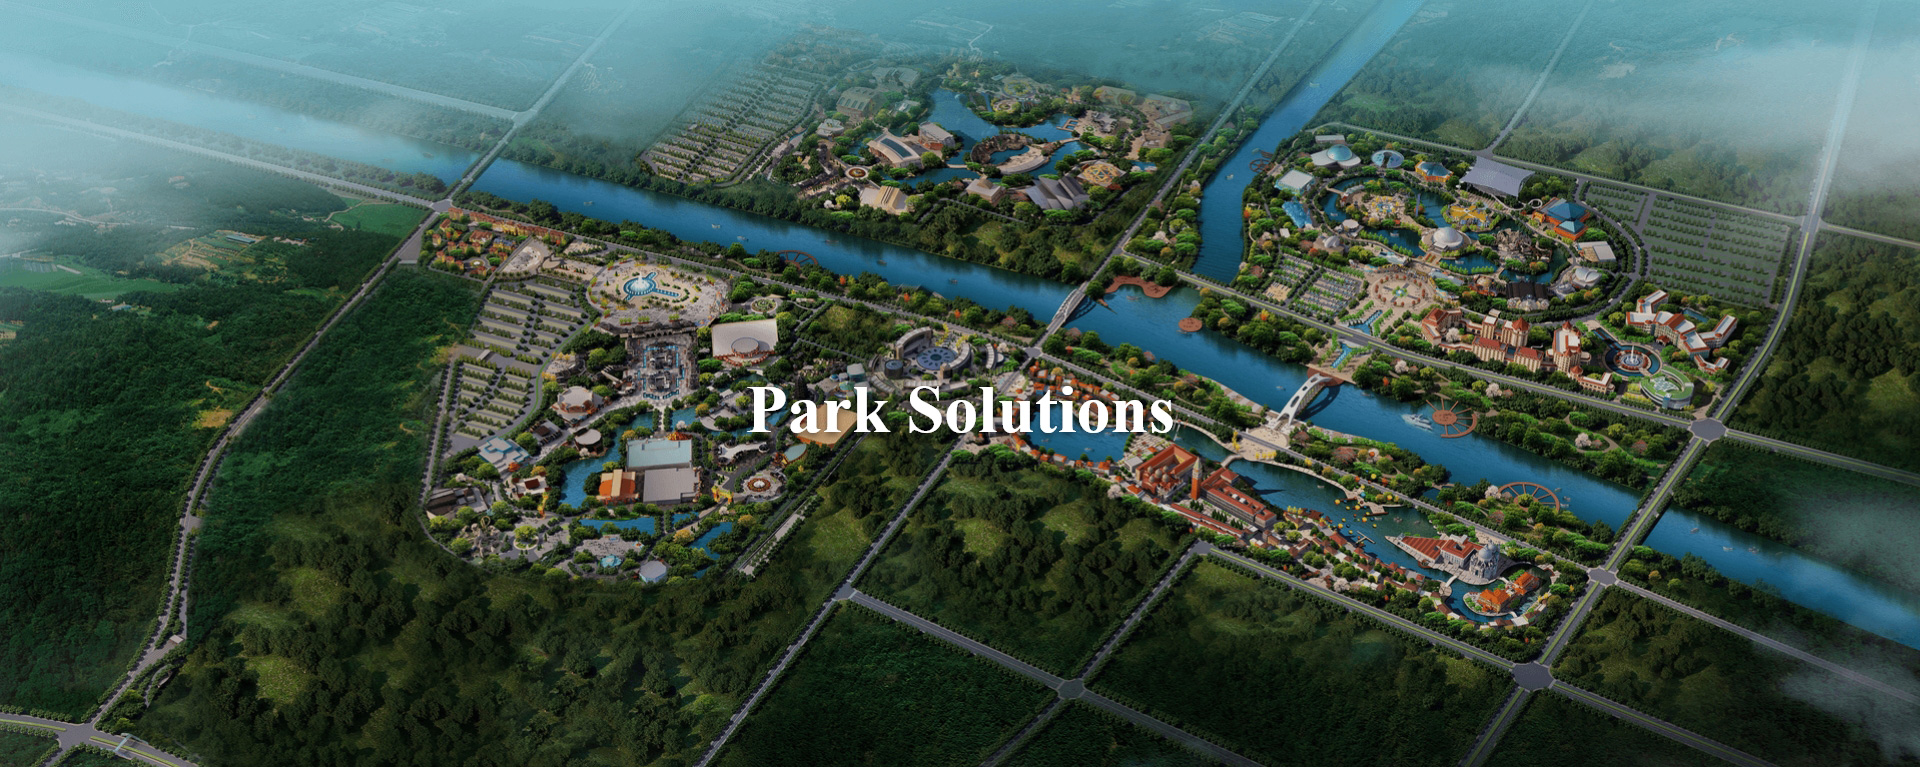 Park Solutions - Your First Selection for Your Park Project